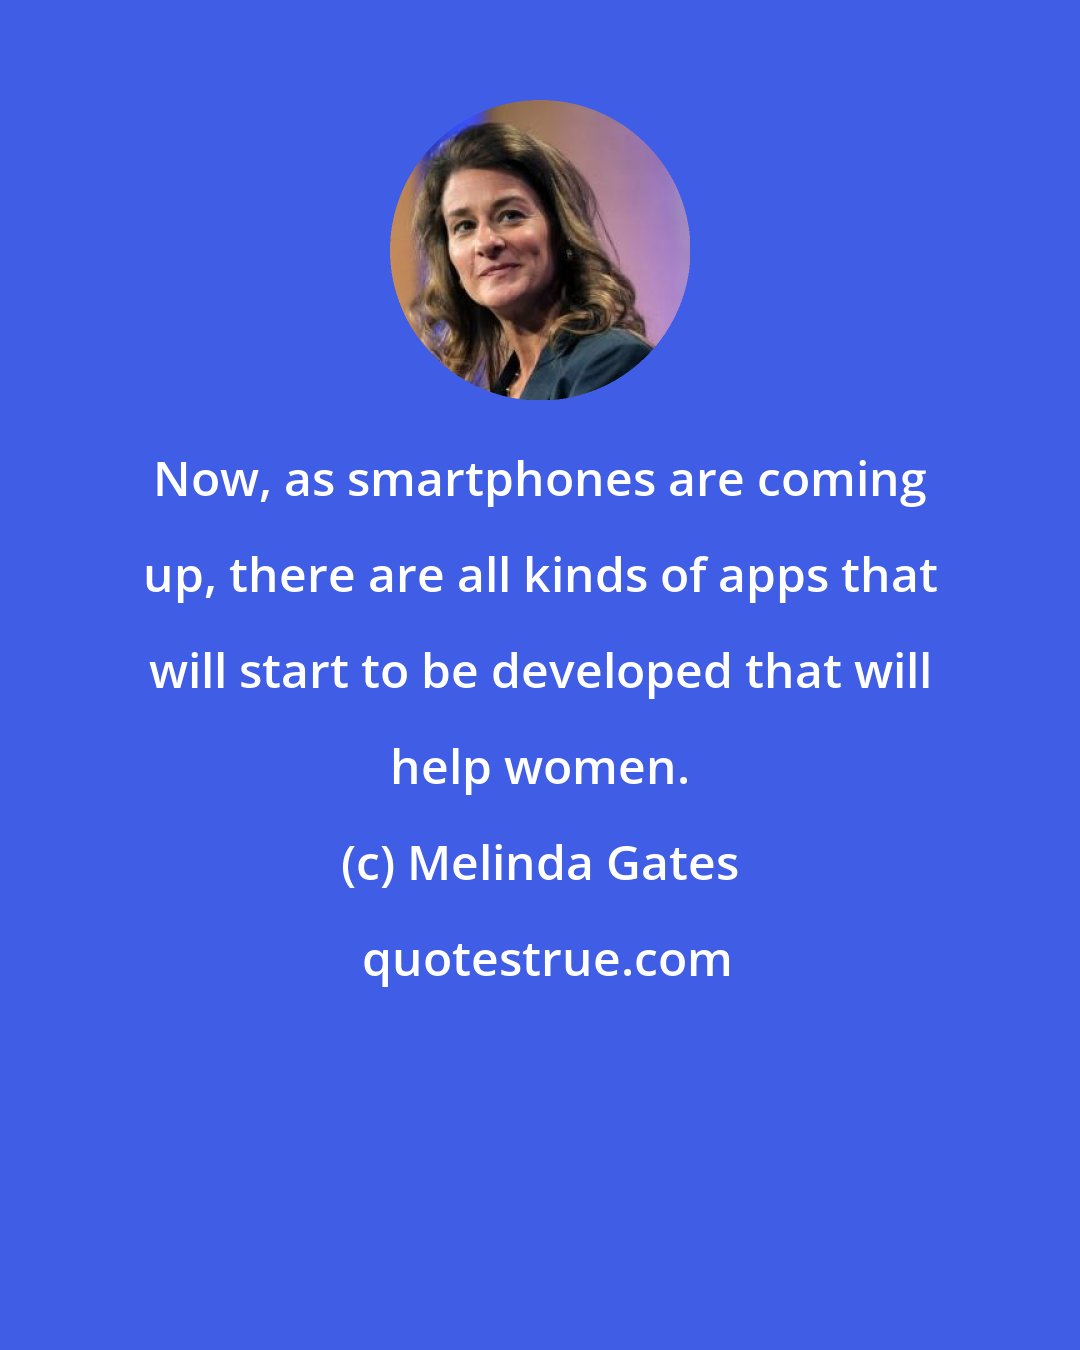 Melinda Gates: Now, as smartphones are coming up, there are all kinds of apps that will start to be developed that will help women.